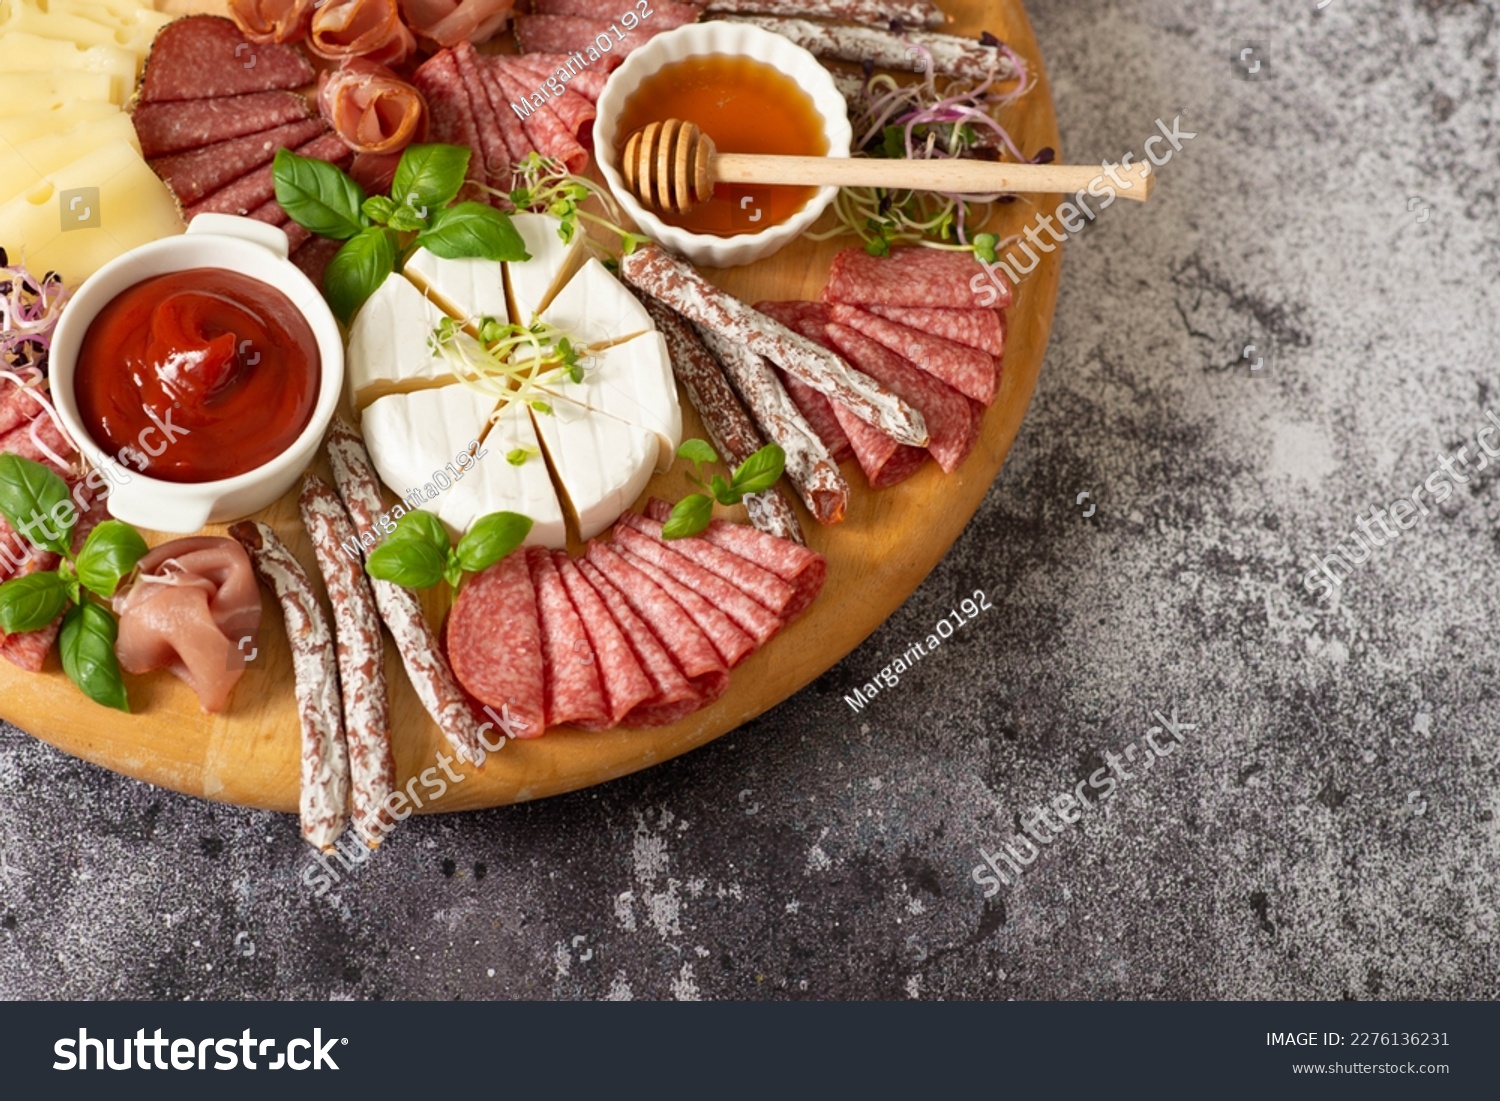 Wooden plate with delicacies. Brie cheese, blue cheese, salami, prosciutto on a wooden board. sausage, cheese, honey. plate of delicacies #2276136231